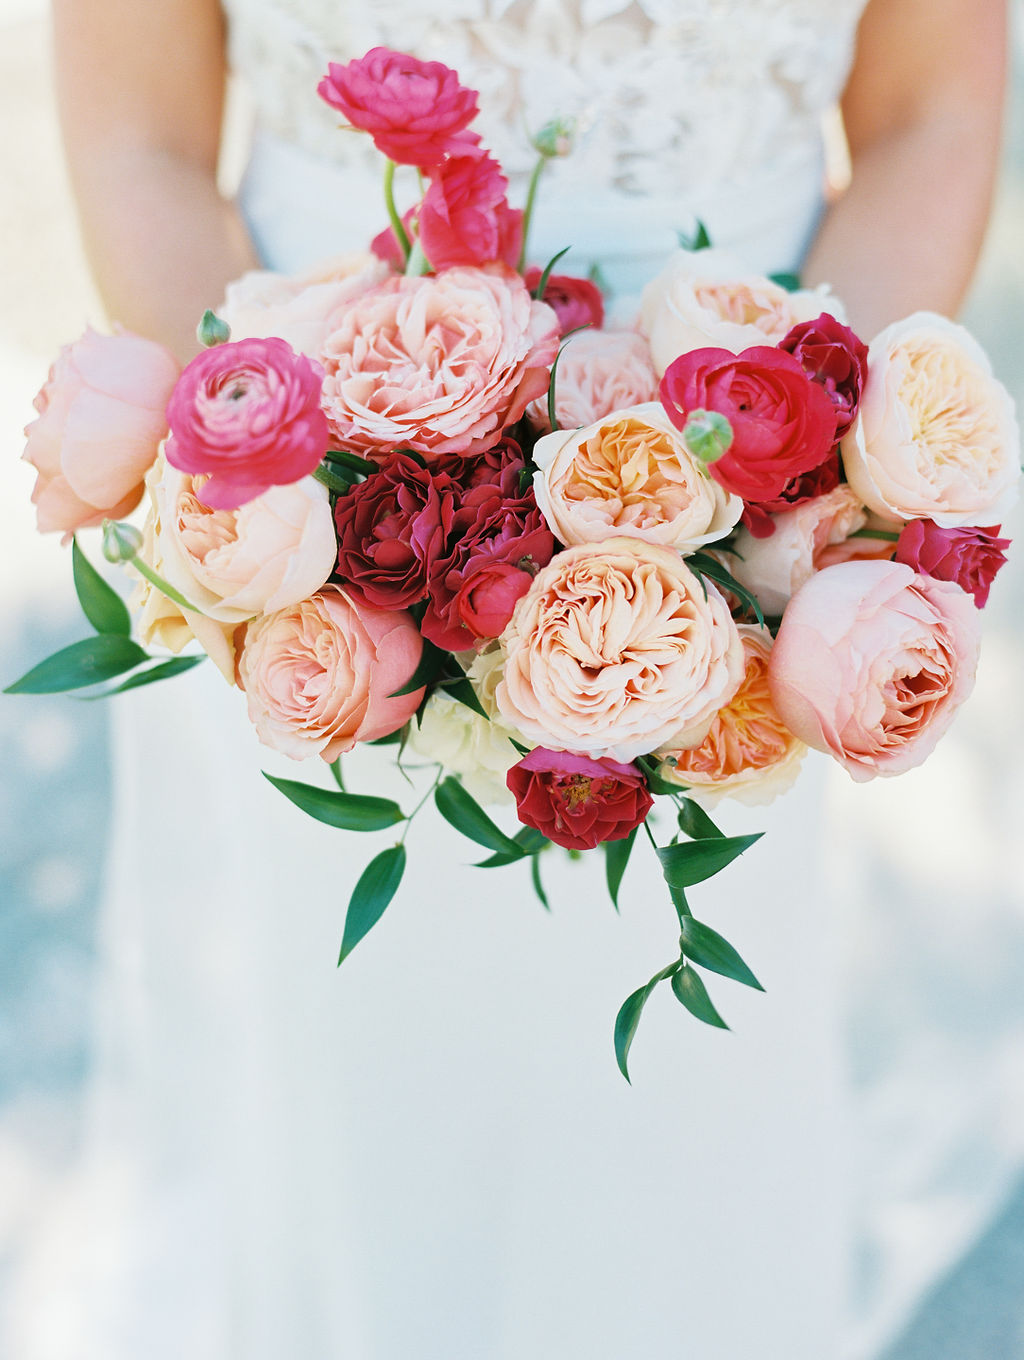 Rose and ranunculus bouquet of pink and peach colors for bride.